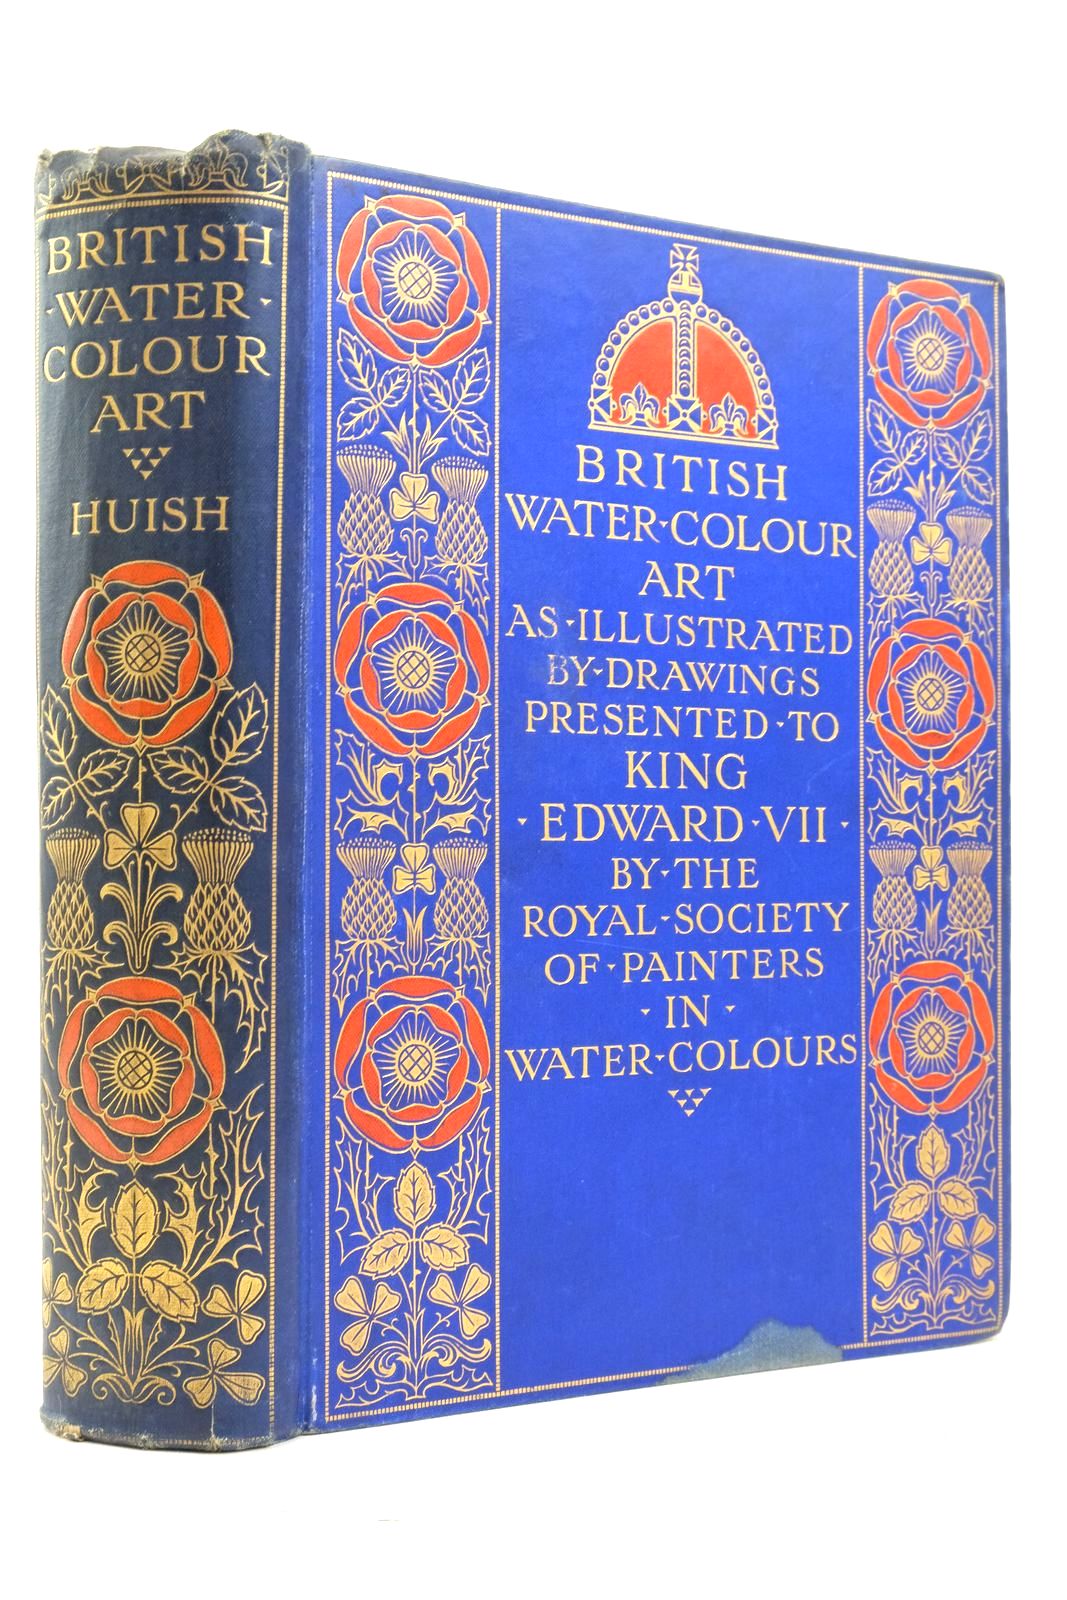 Photo of BRITISH WATER-COLOUR ART written by Huish, Marcus B. published by Adam &amp; Charles Black, The Fine Art Society Ltd. (STOCK CODE: 2137534)  for sale by Stella & Rose's Books